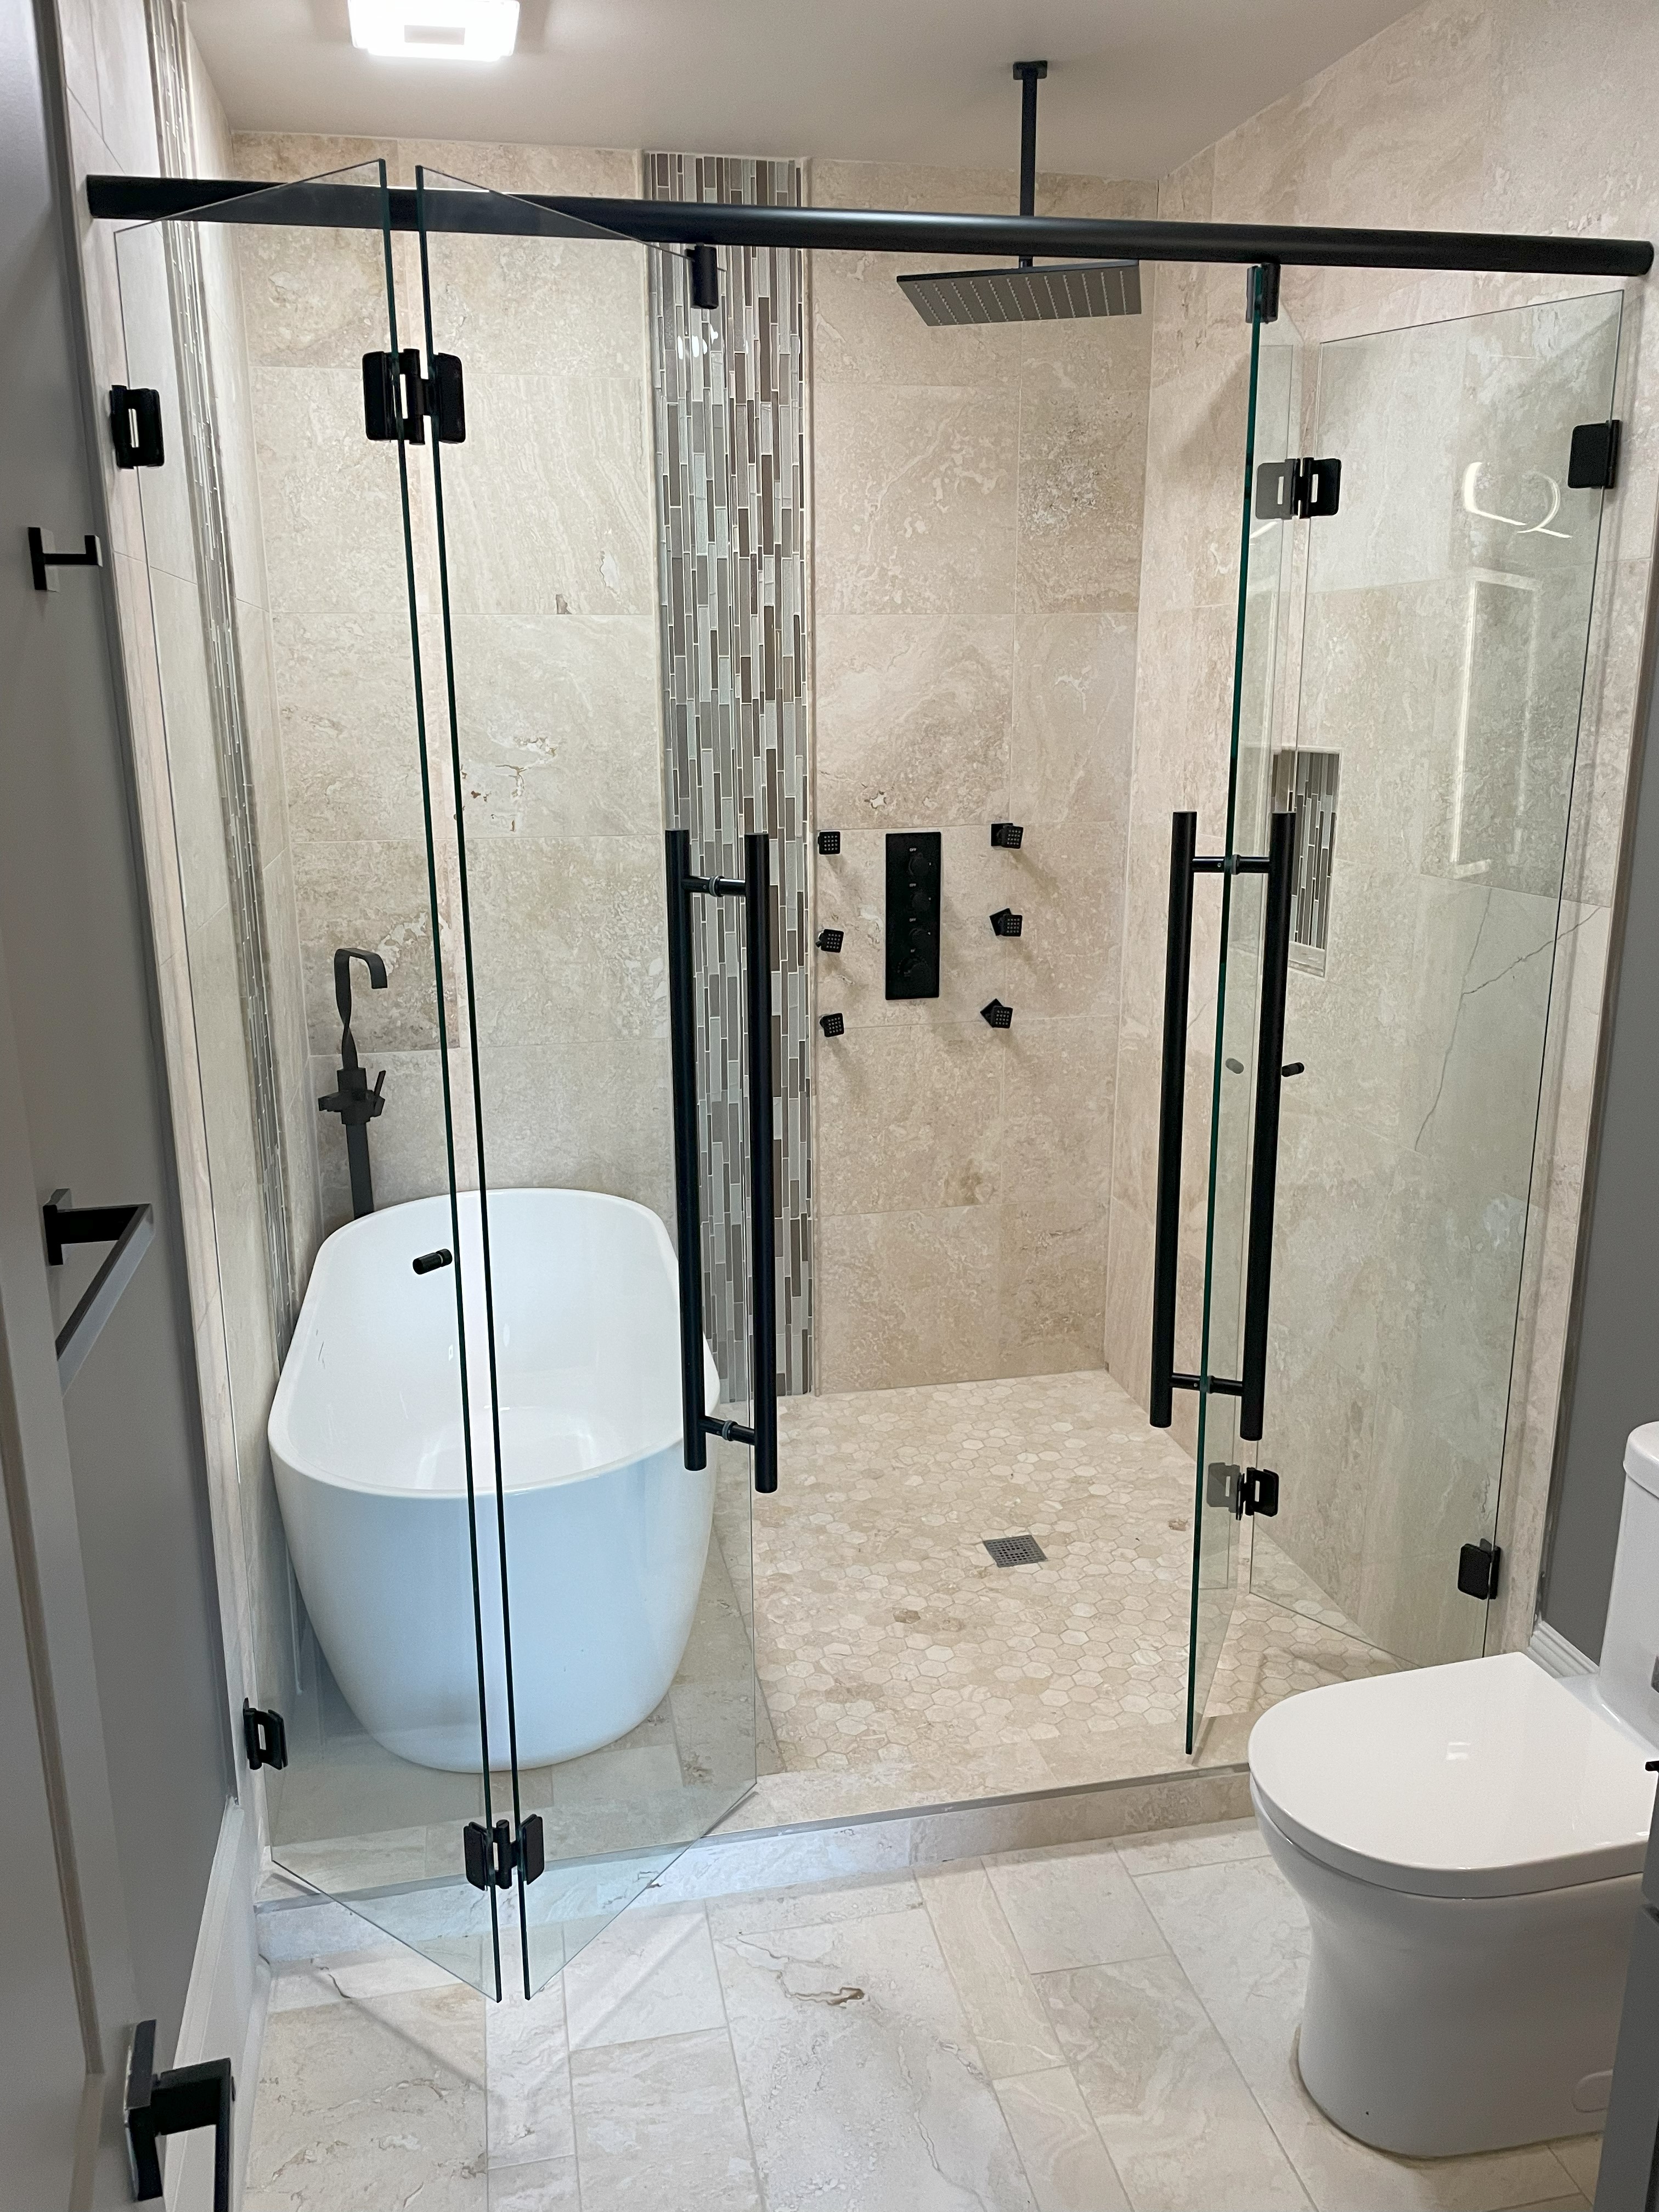 This shower features a double bi-fold accordion system which allows the user to open the left side away from the bathtub and the right side into the shower away from the toilet. This allows for the maximum possible opening for the homeowner! 